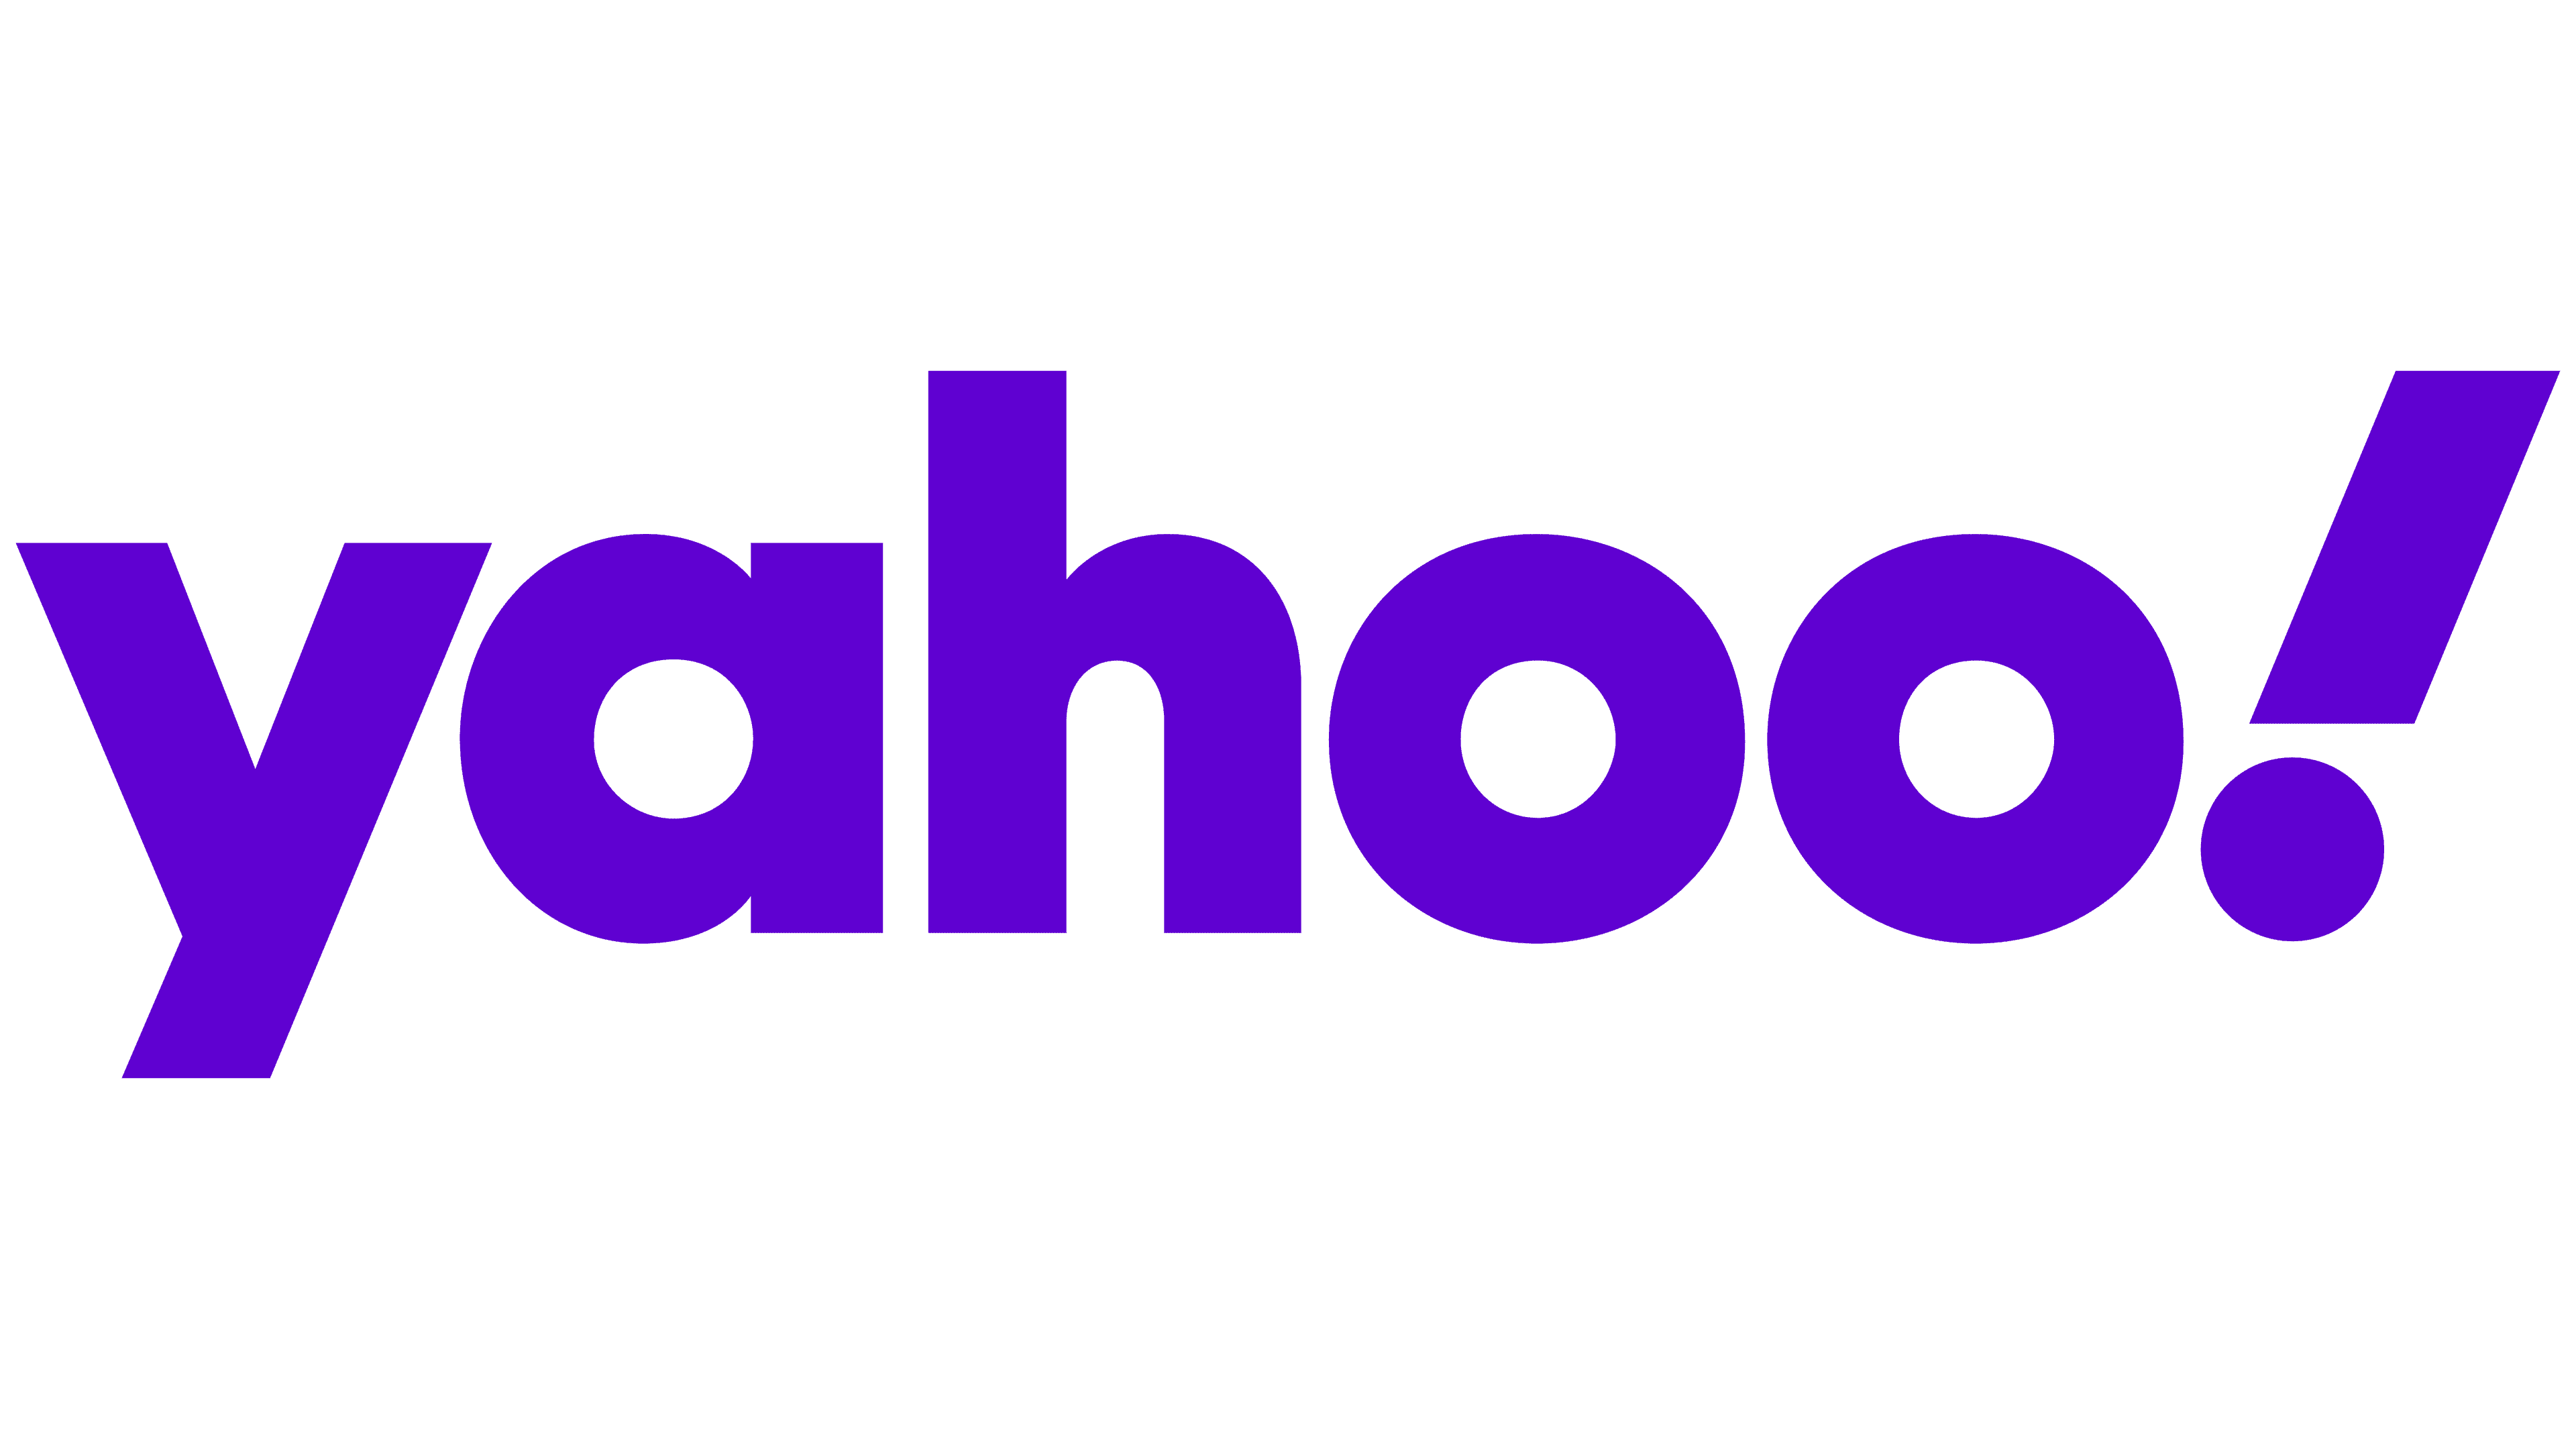 logo of yahoo, the news outlet and where we had on on demand hair link